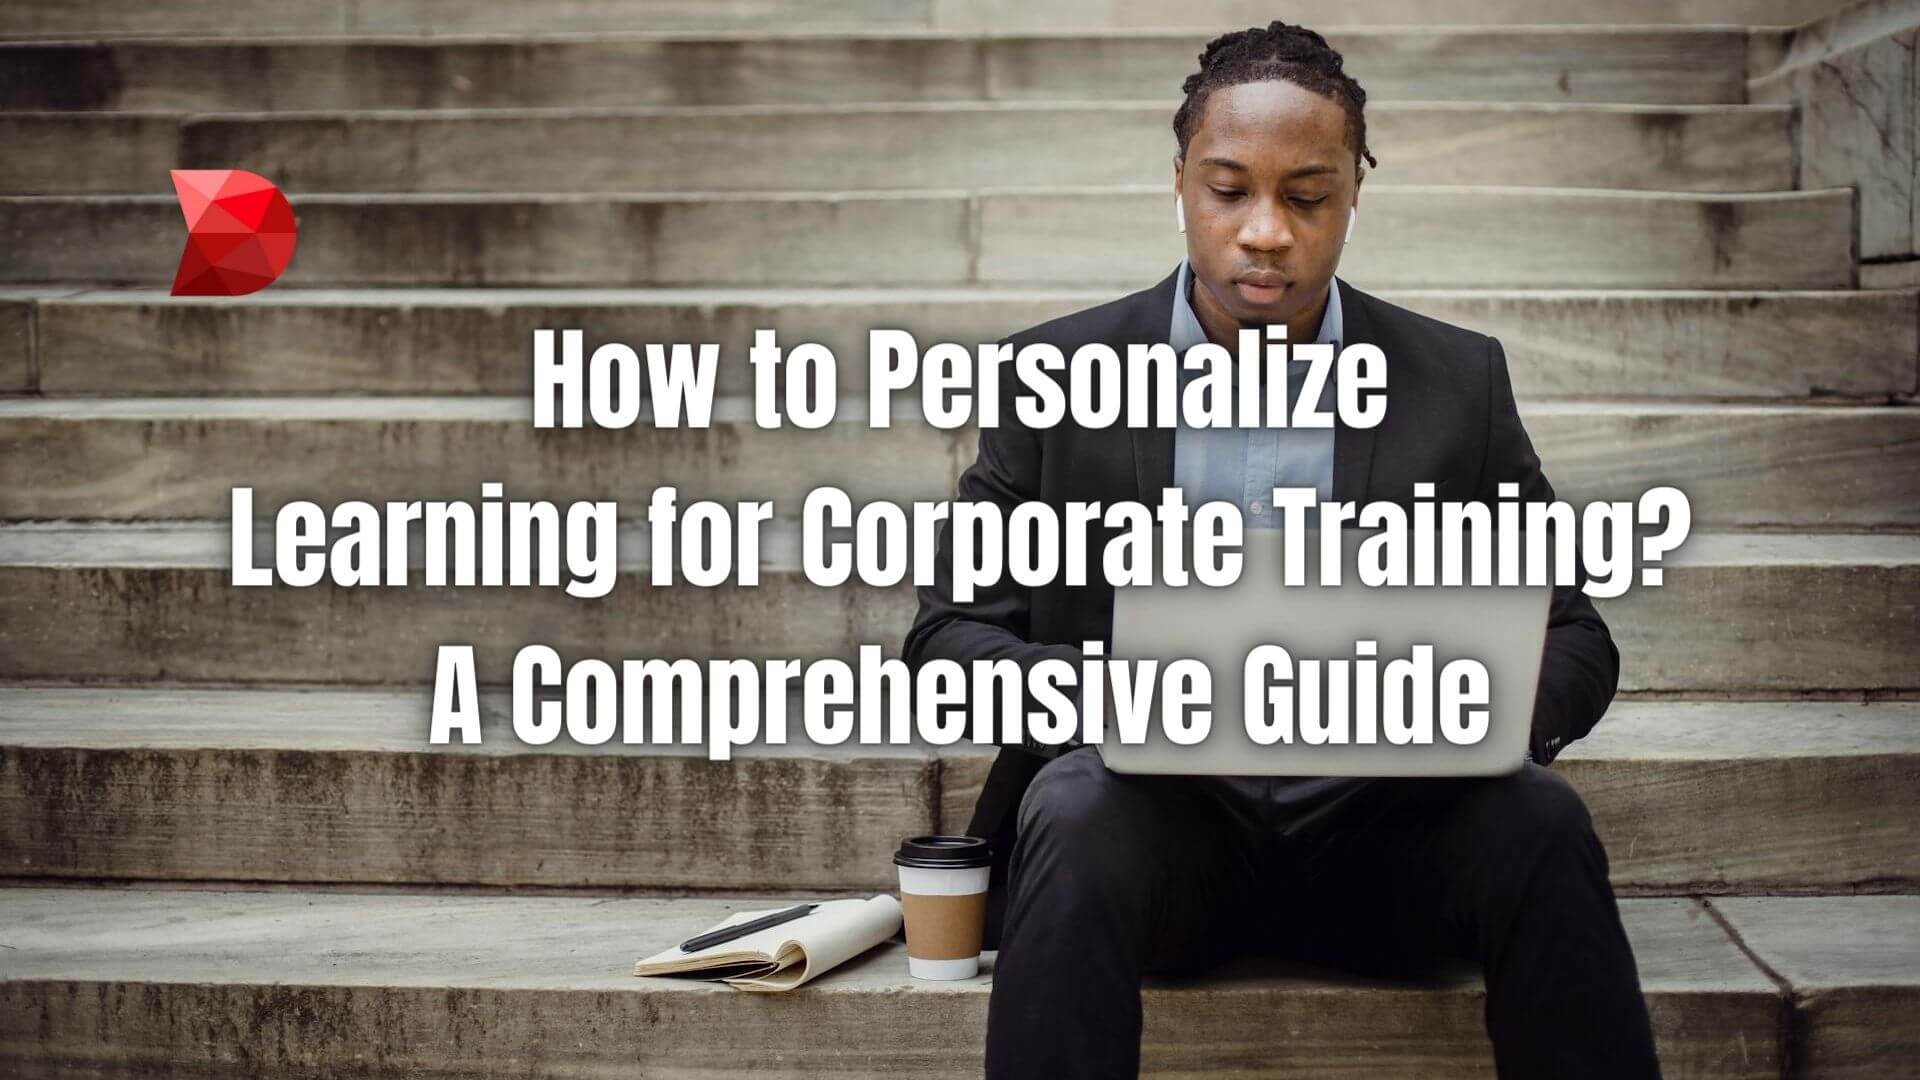 Revolutionize corporate training through personalized learning approaches. Learn how to tailor programs effectively for maximum impact.